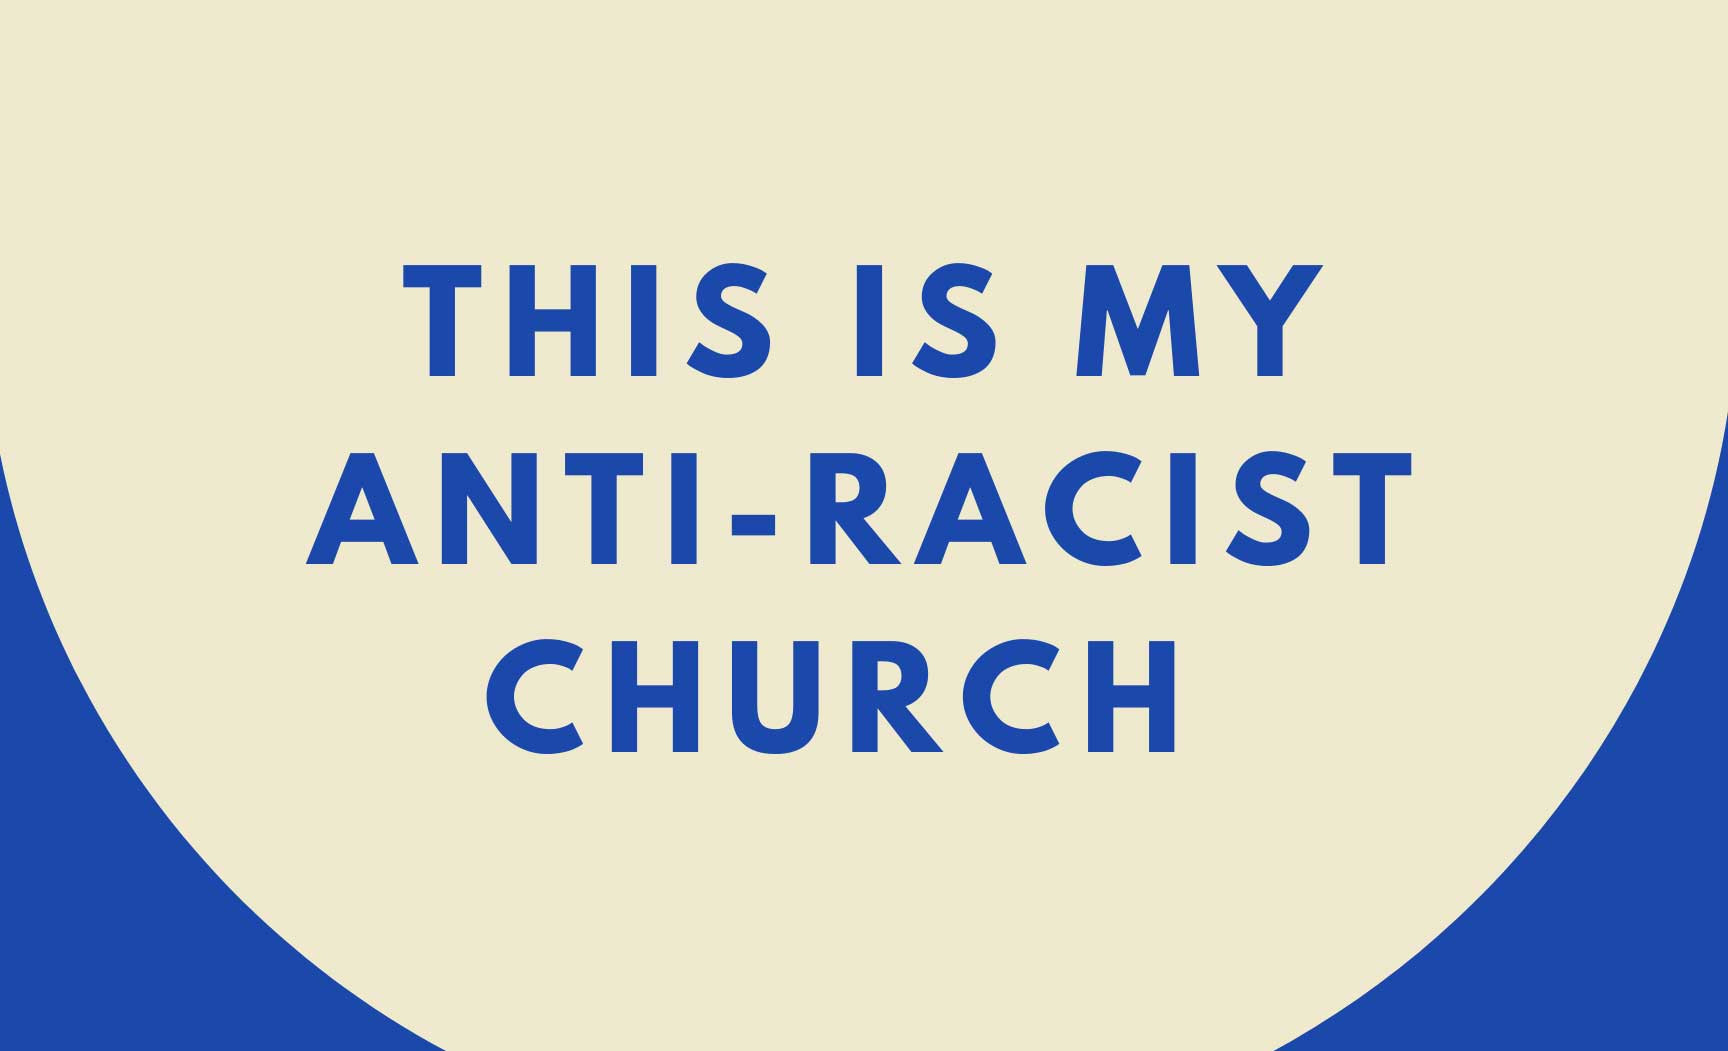 This is my anti-racist church